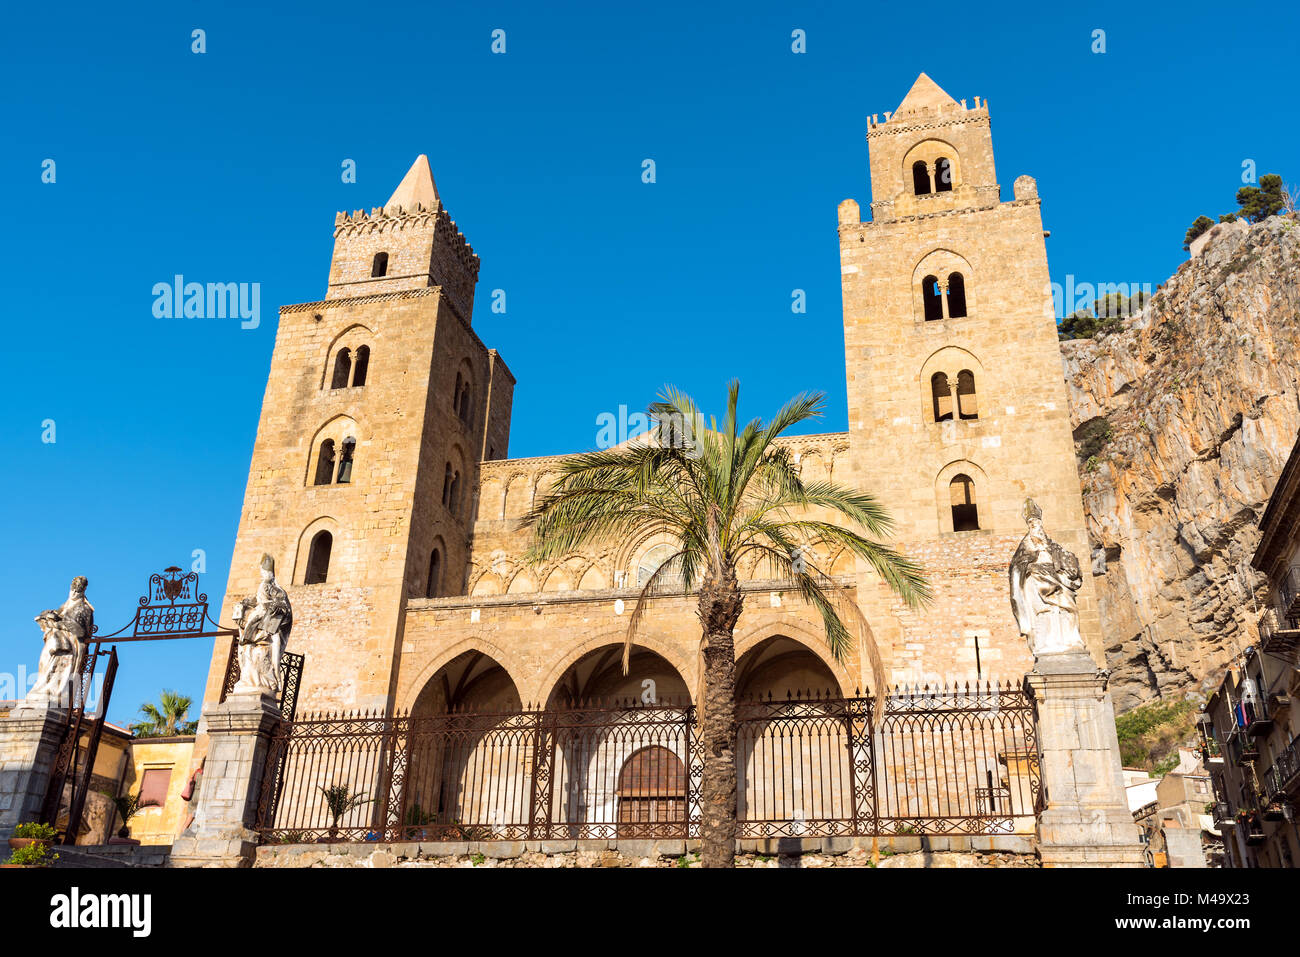 The norman cathedral of Cefalu in Sicily, Italy Stock Photo